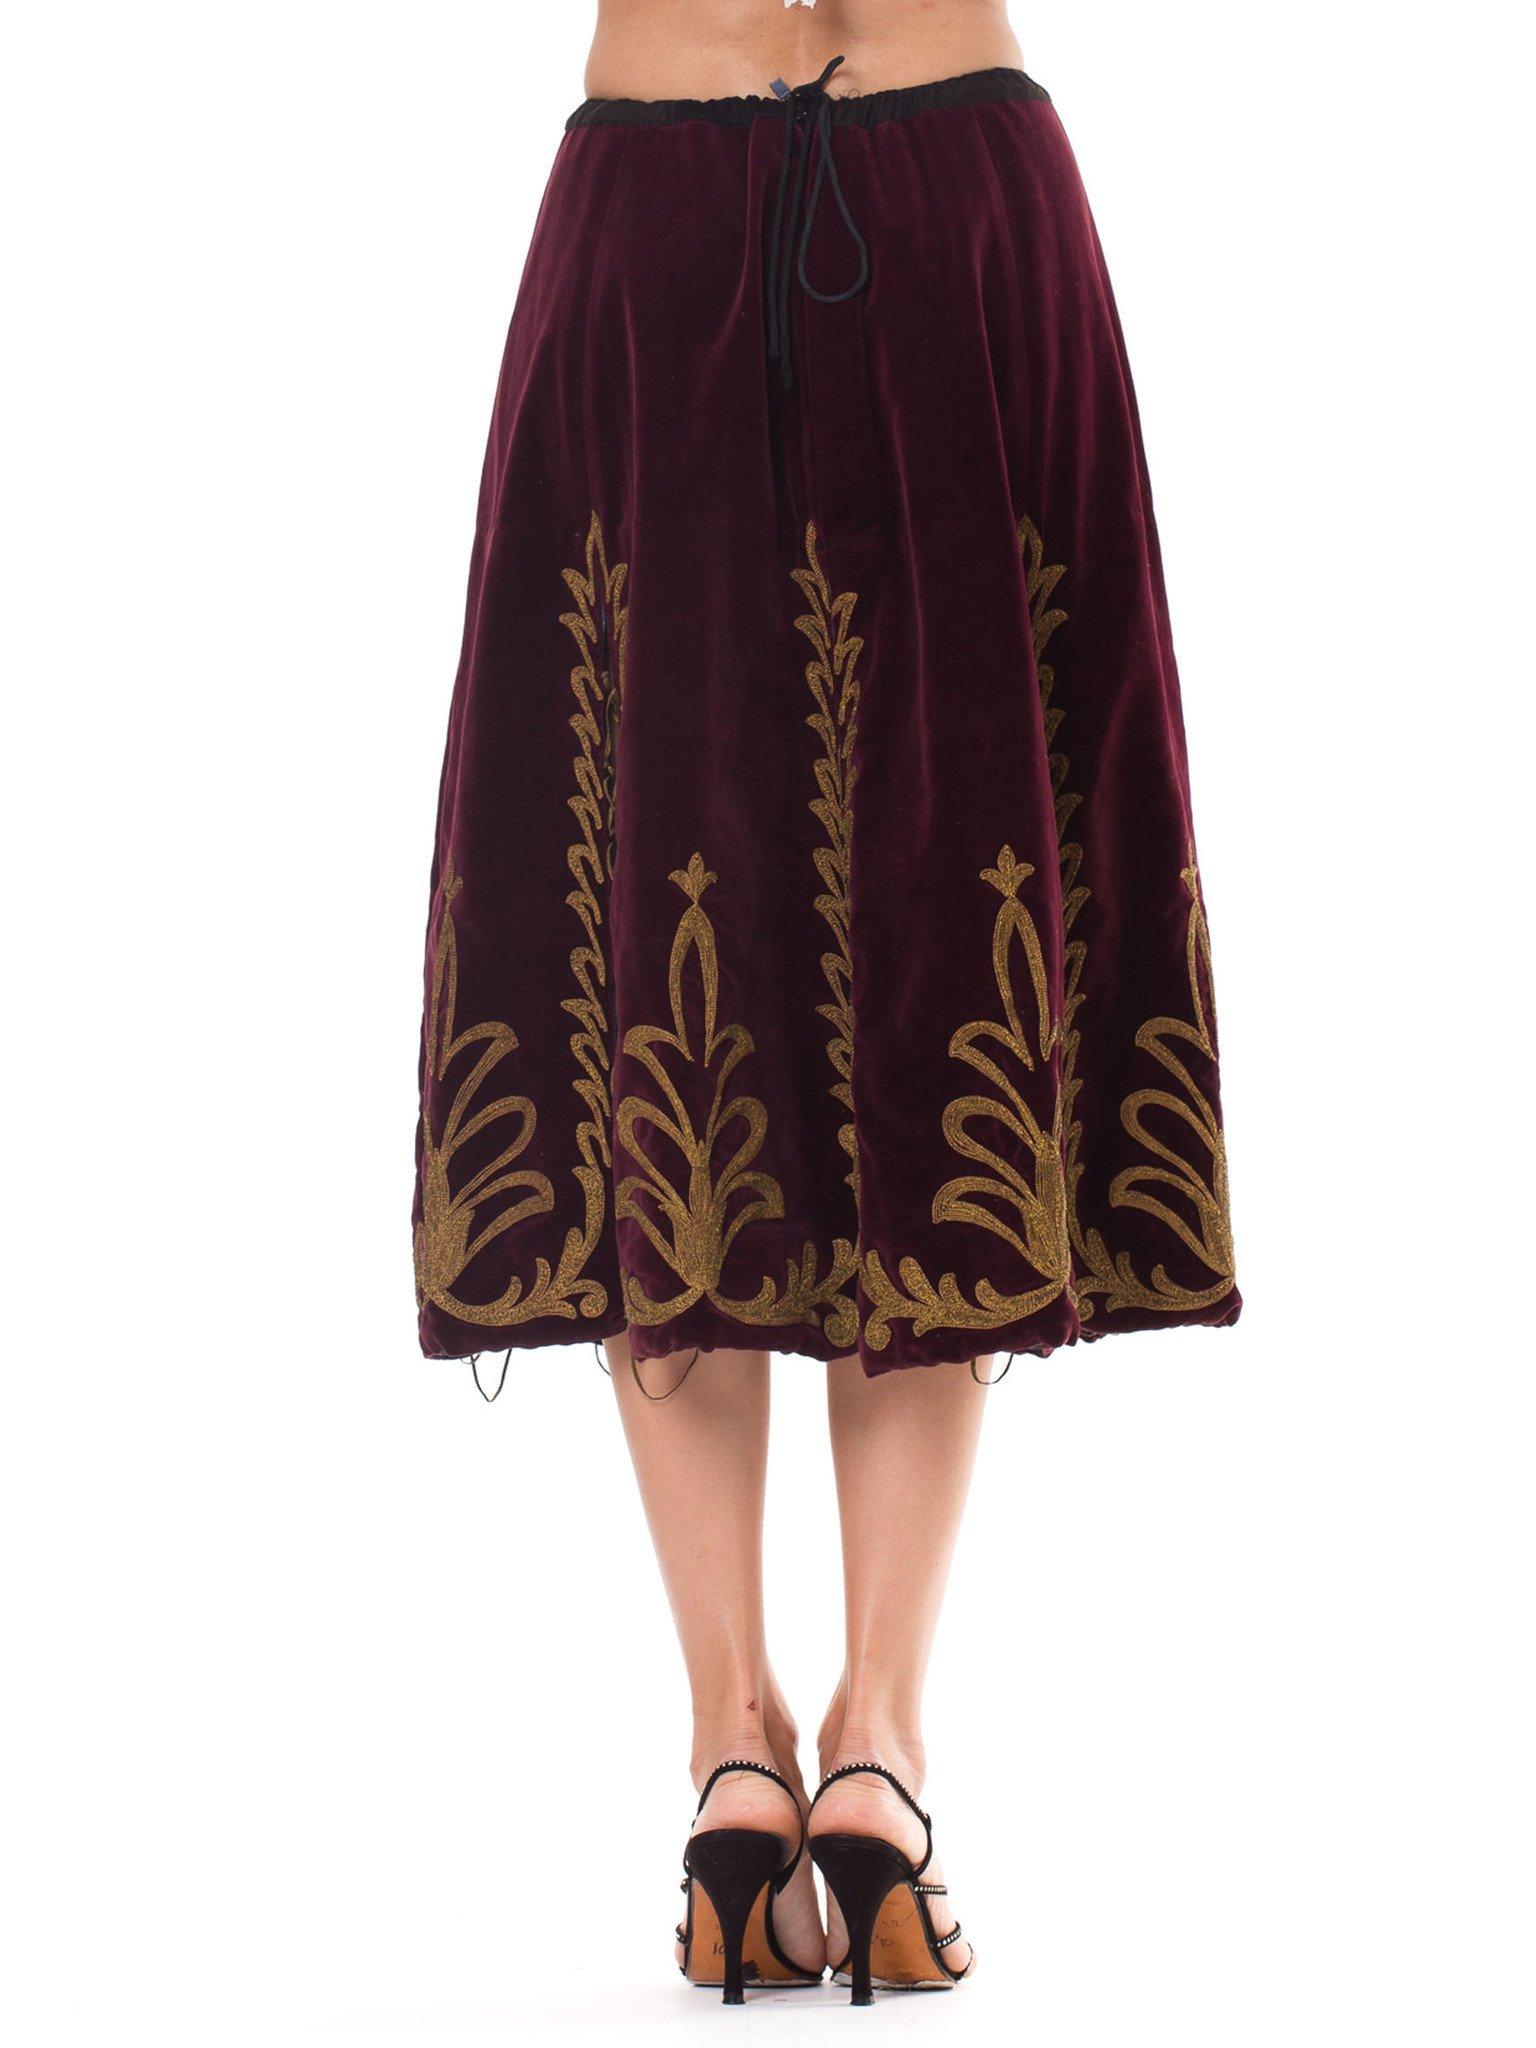 Women's Victorian Cranberry Red Cotton Velvet Skirt With Gold Real Metal Embroidery